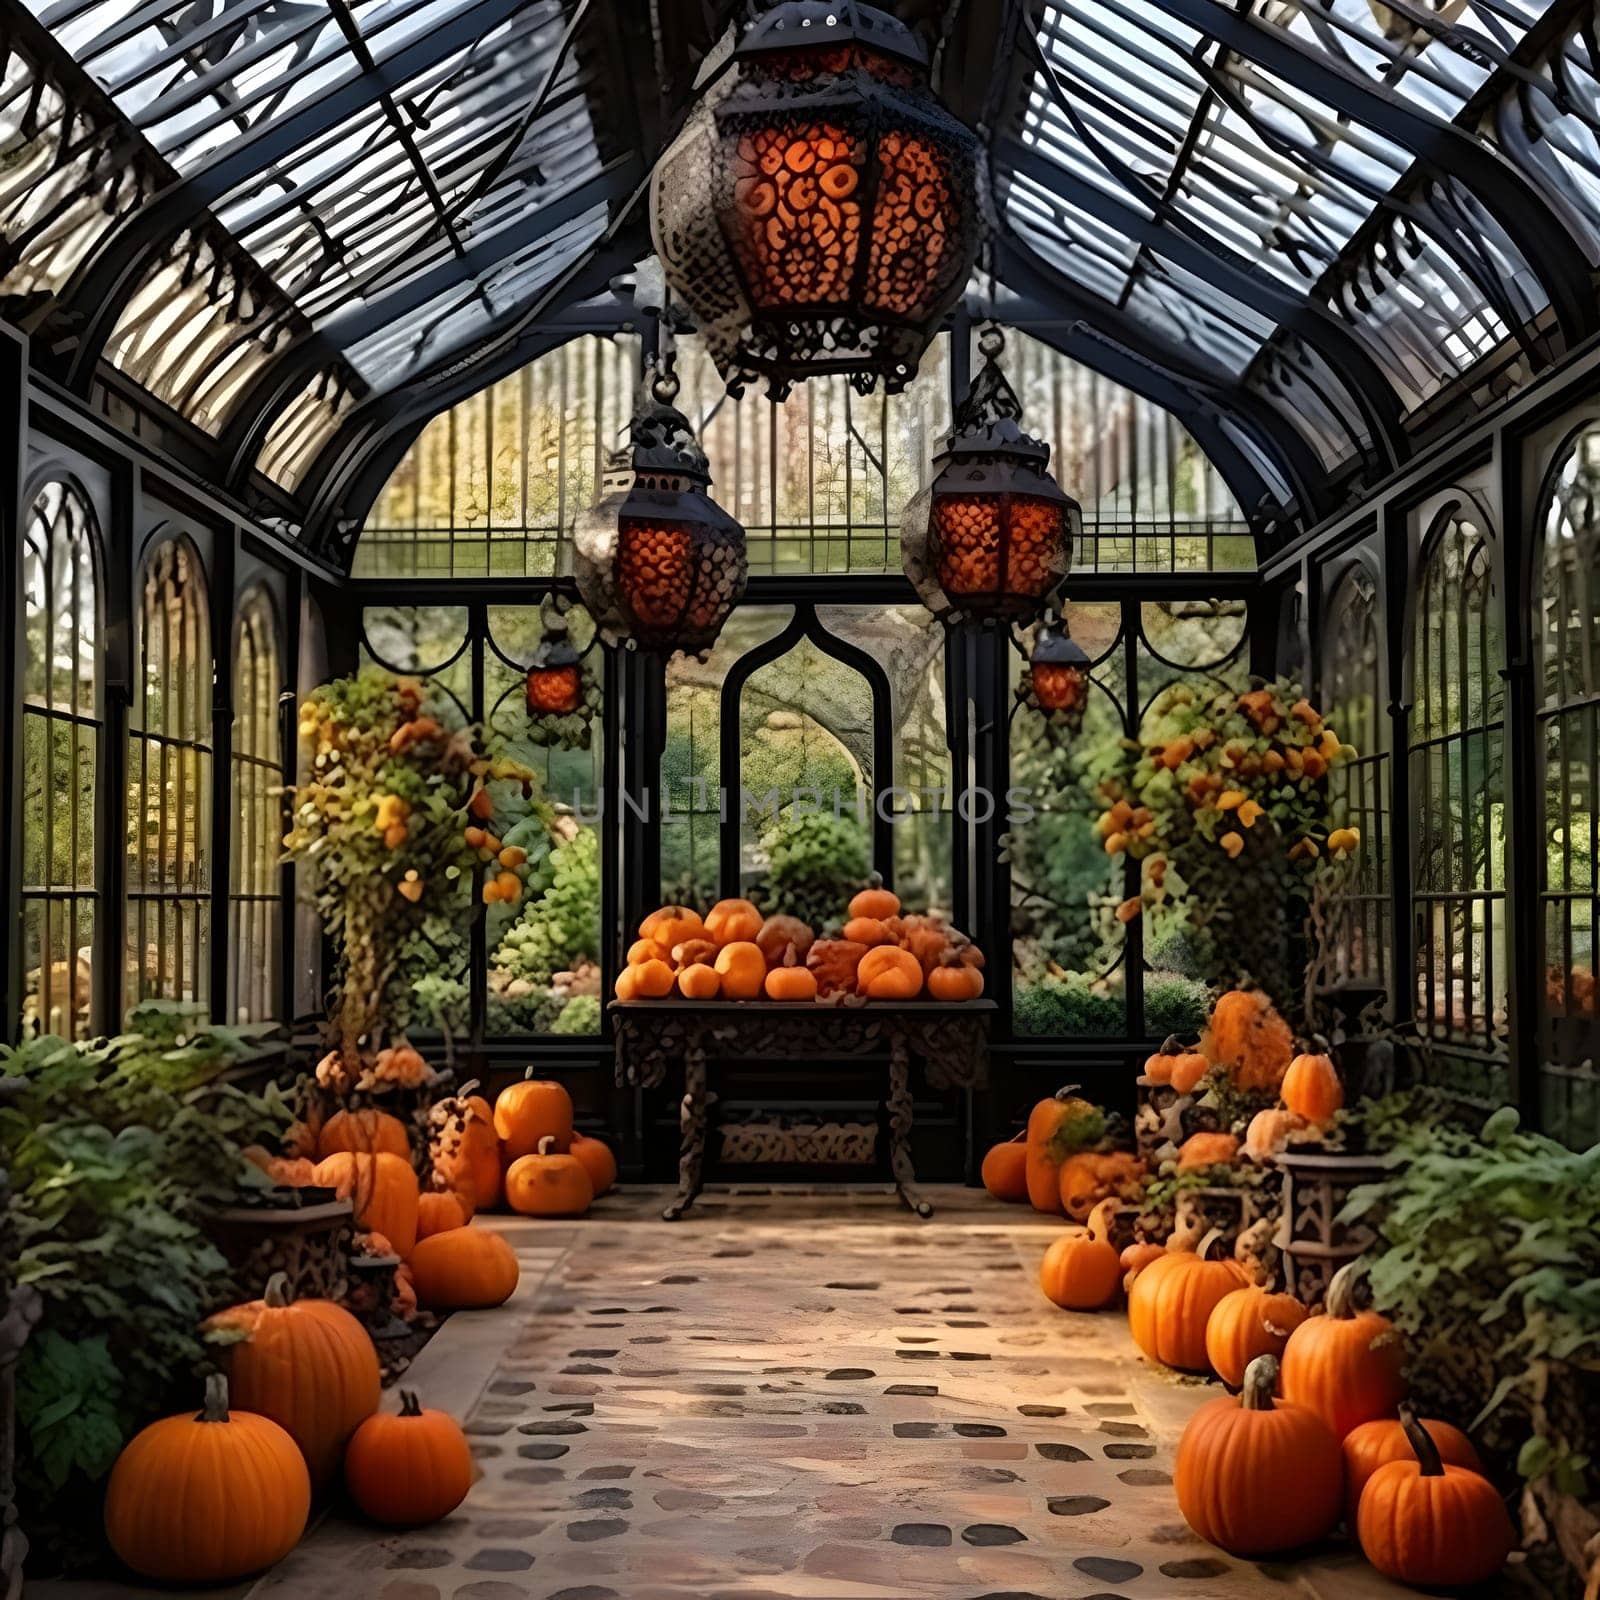 An elegant greenhouse filled with pumpkins. Pumpkin as a dish of thanksgiving for the harvest. by ThemesS